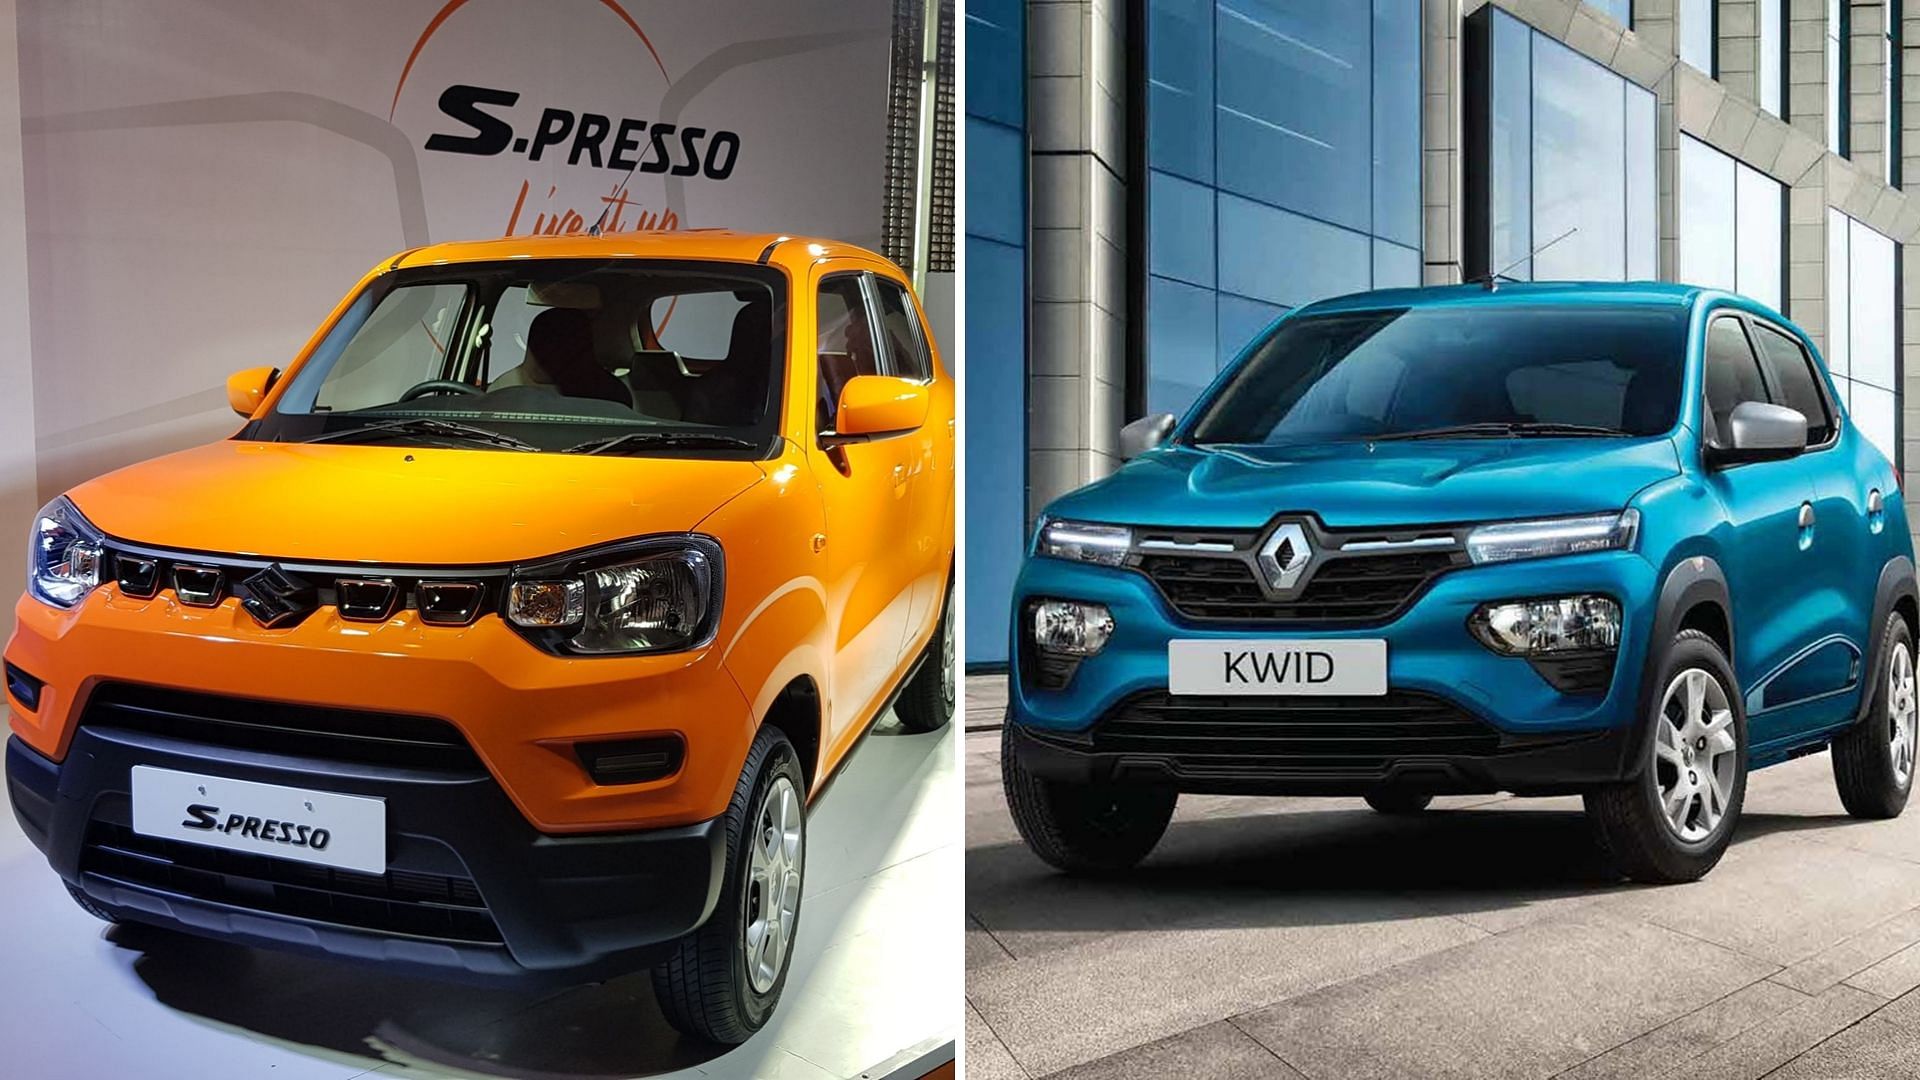 Would you pick the newbie Maruti Suzuki S-Presso or go for the reliable Kwid?